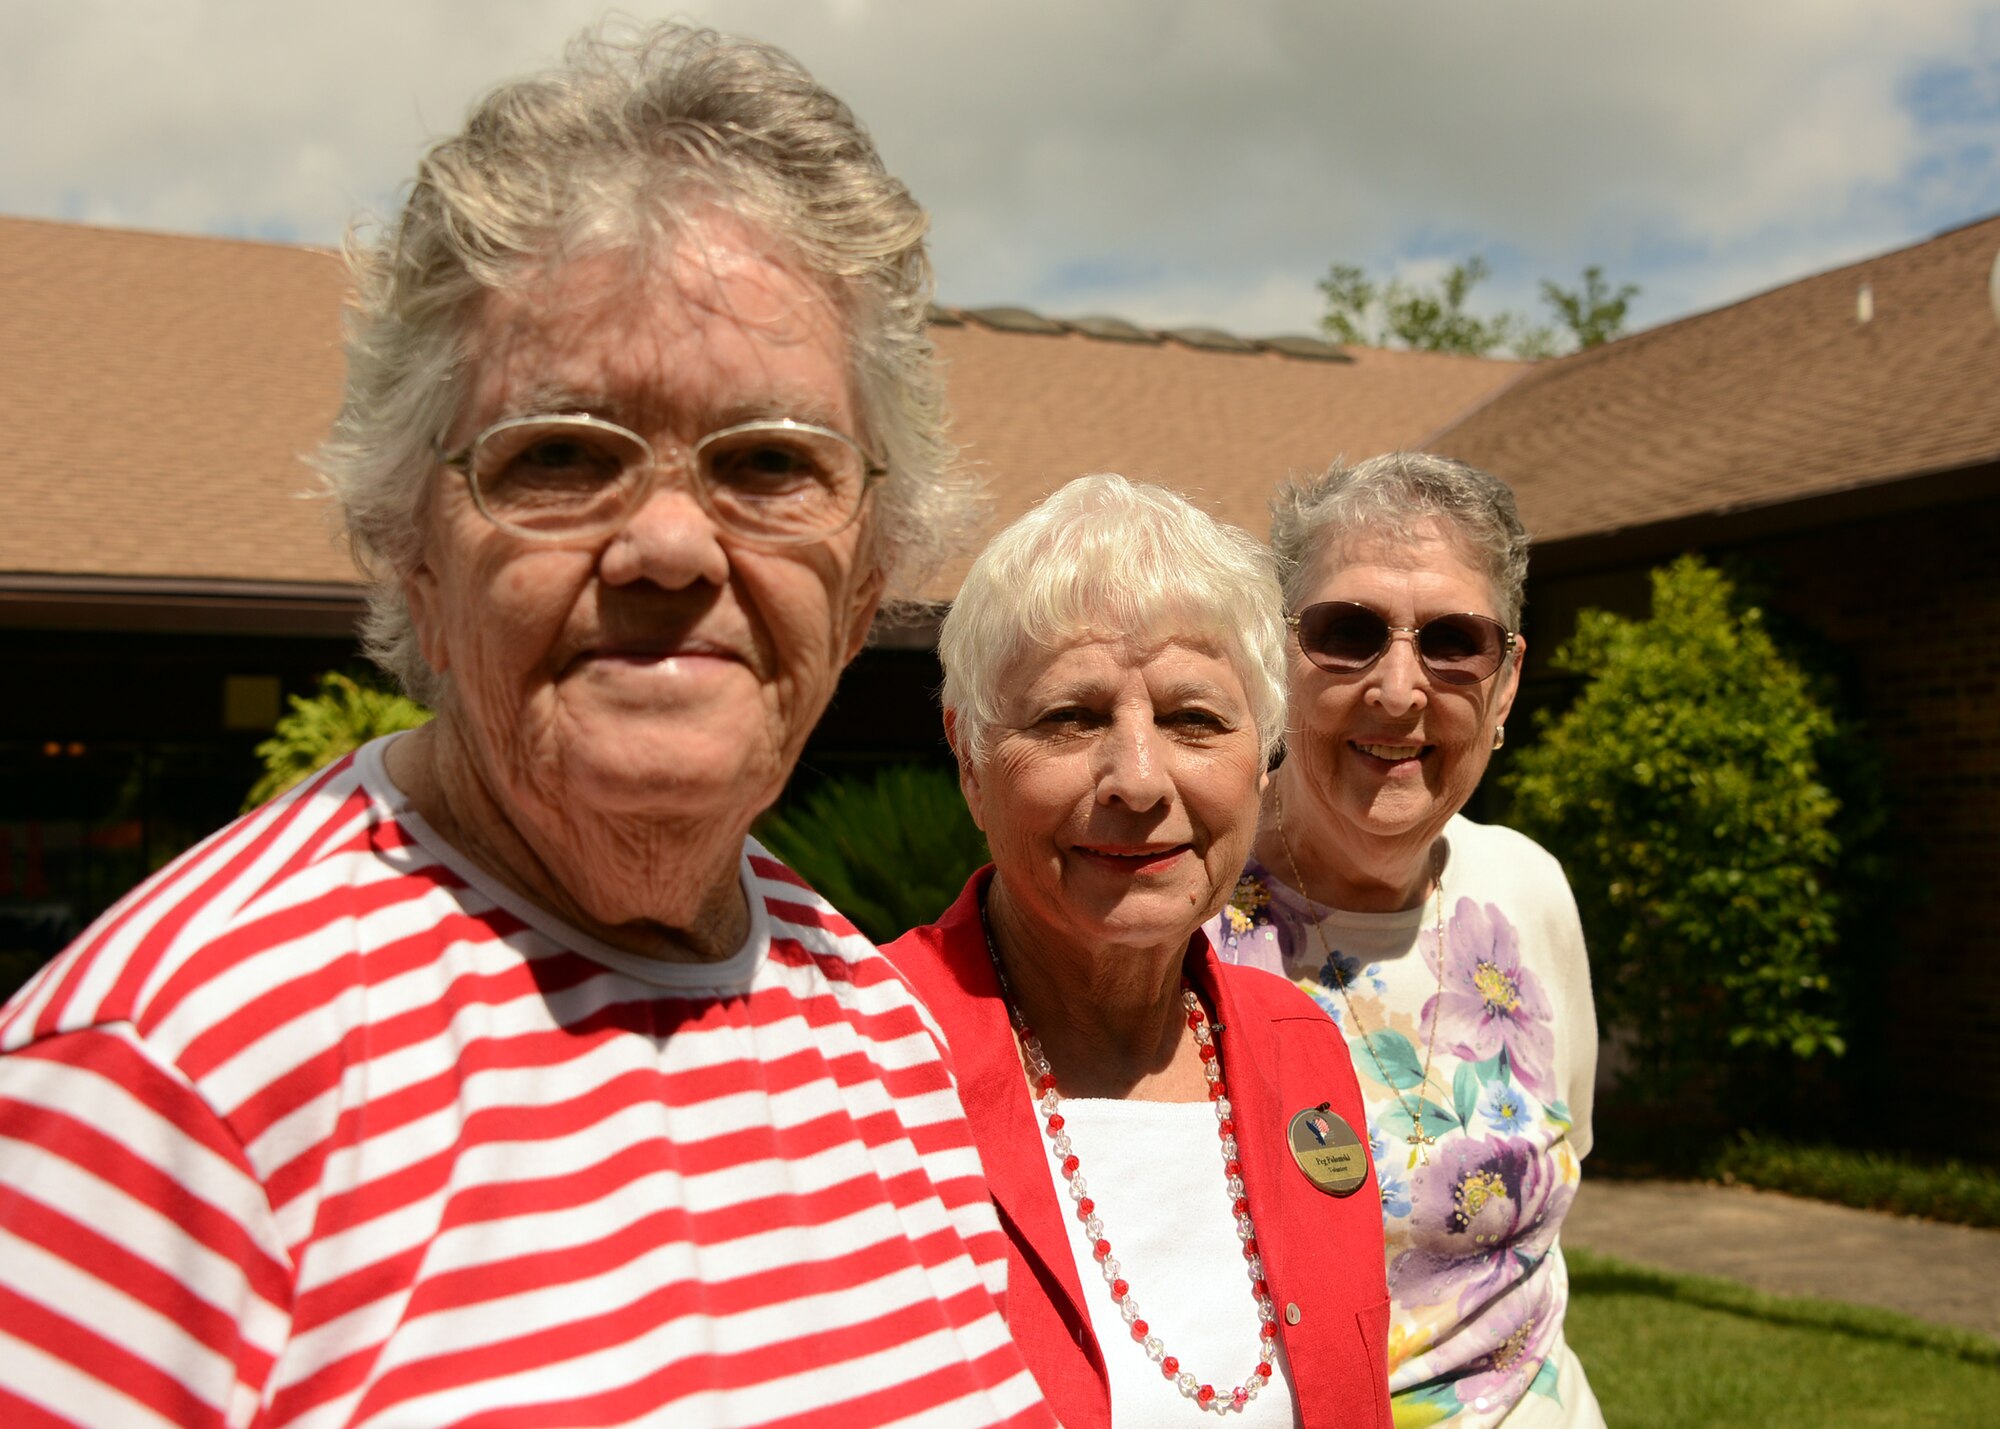 (From left to right) Choyce Sheehan, Peg Polomski and Donna Forget stand for a photograph at Bob Hope Village, Shalimar, Fla., June 3, 2013.